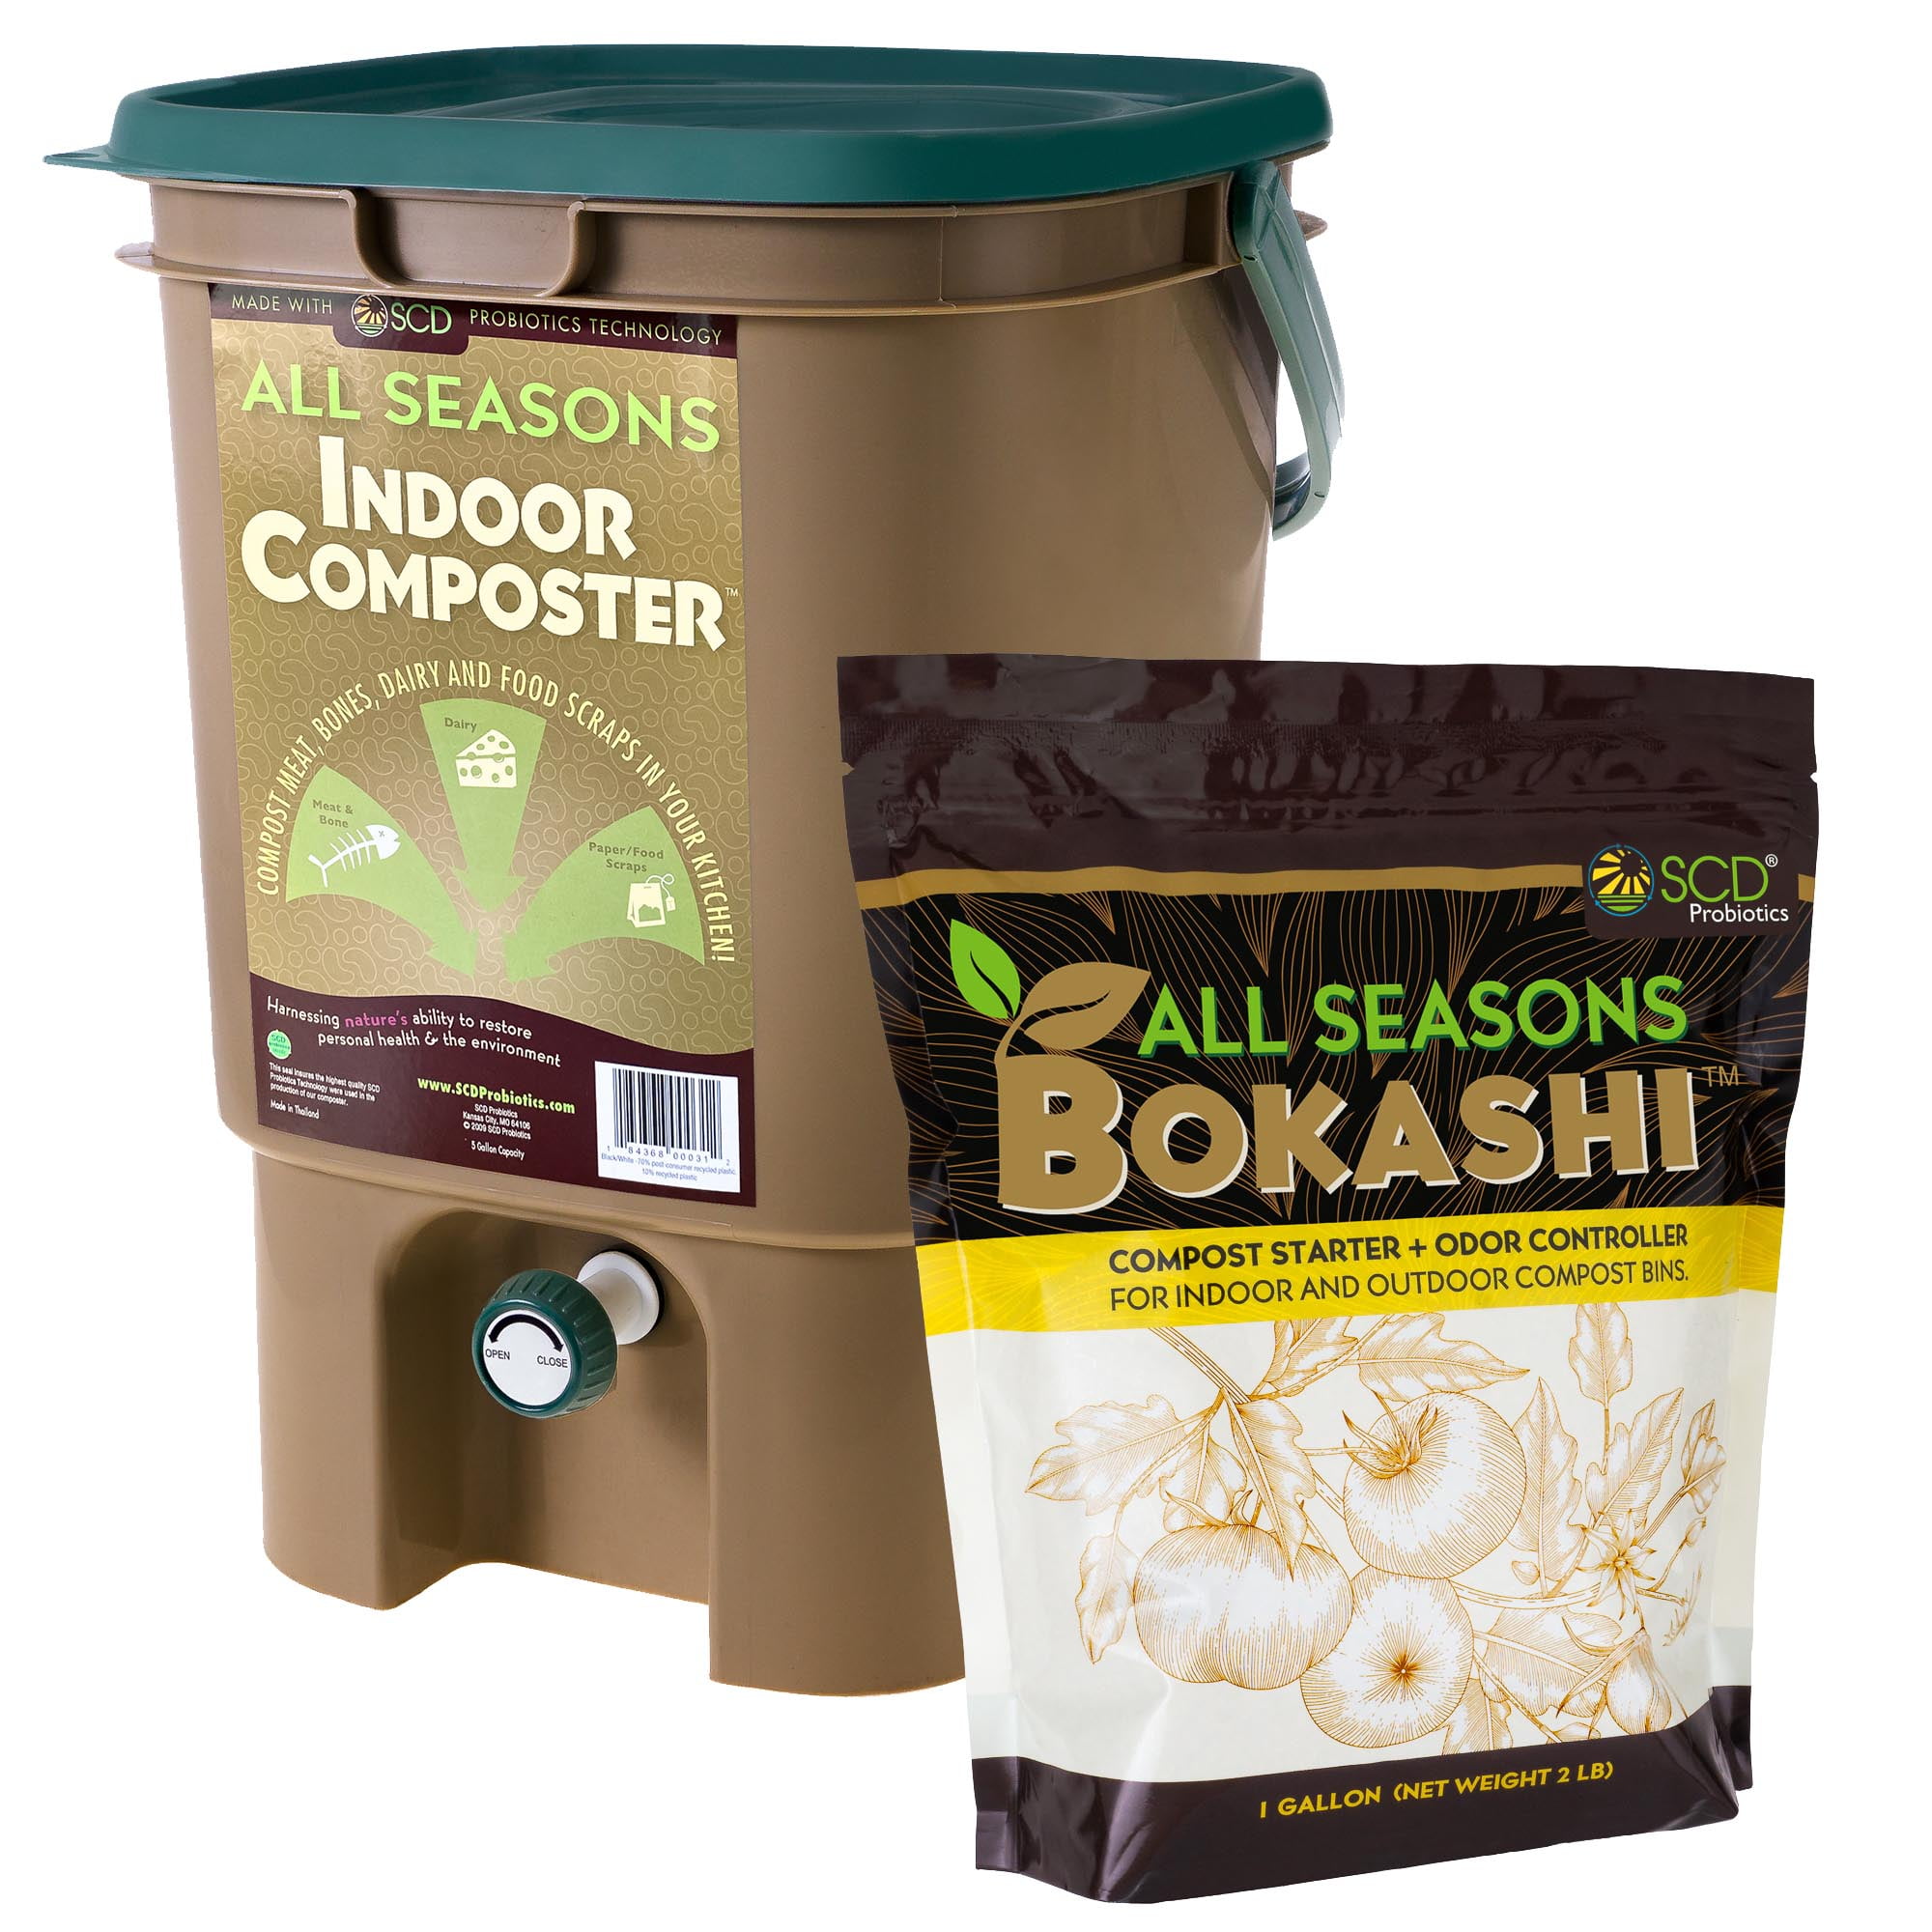 Vipush Compost Bin Kitchen Counter, Durmmur 1.0 Gallon Indoor Kitchen  Compost Bin, Energetic Green Countertop Compost Bin with Lid Sealed for  Waste Food Compost Bucket 